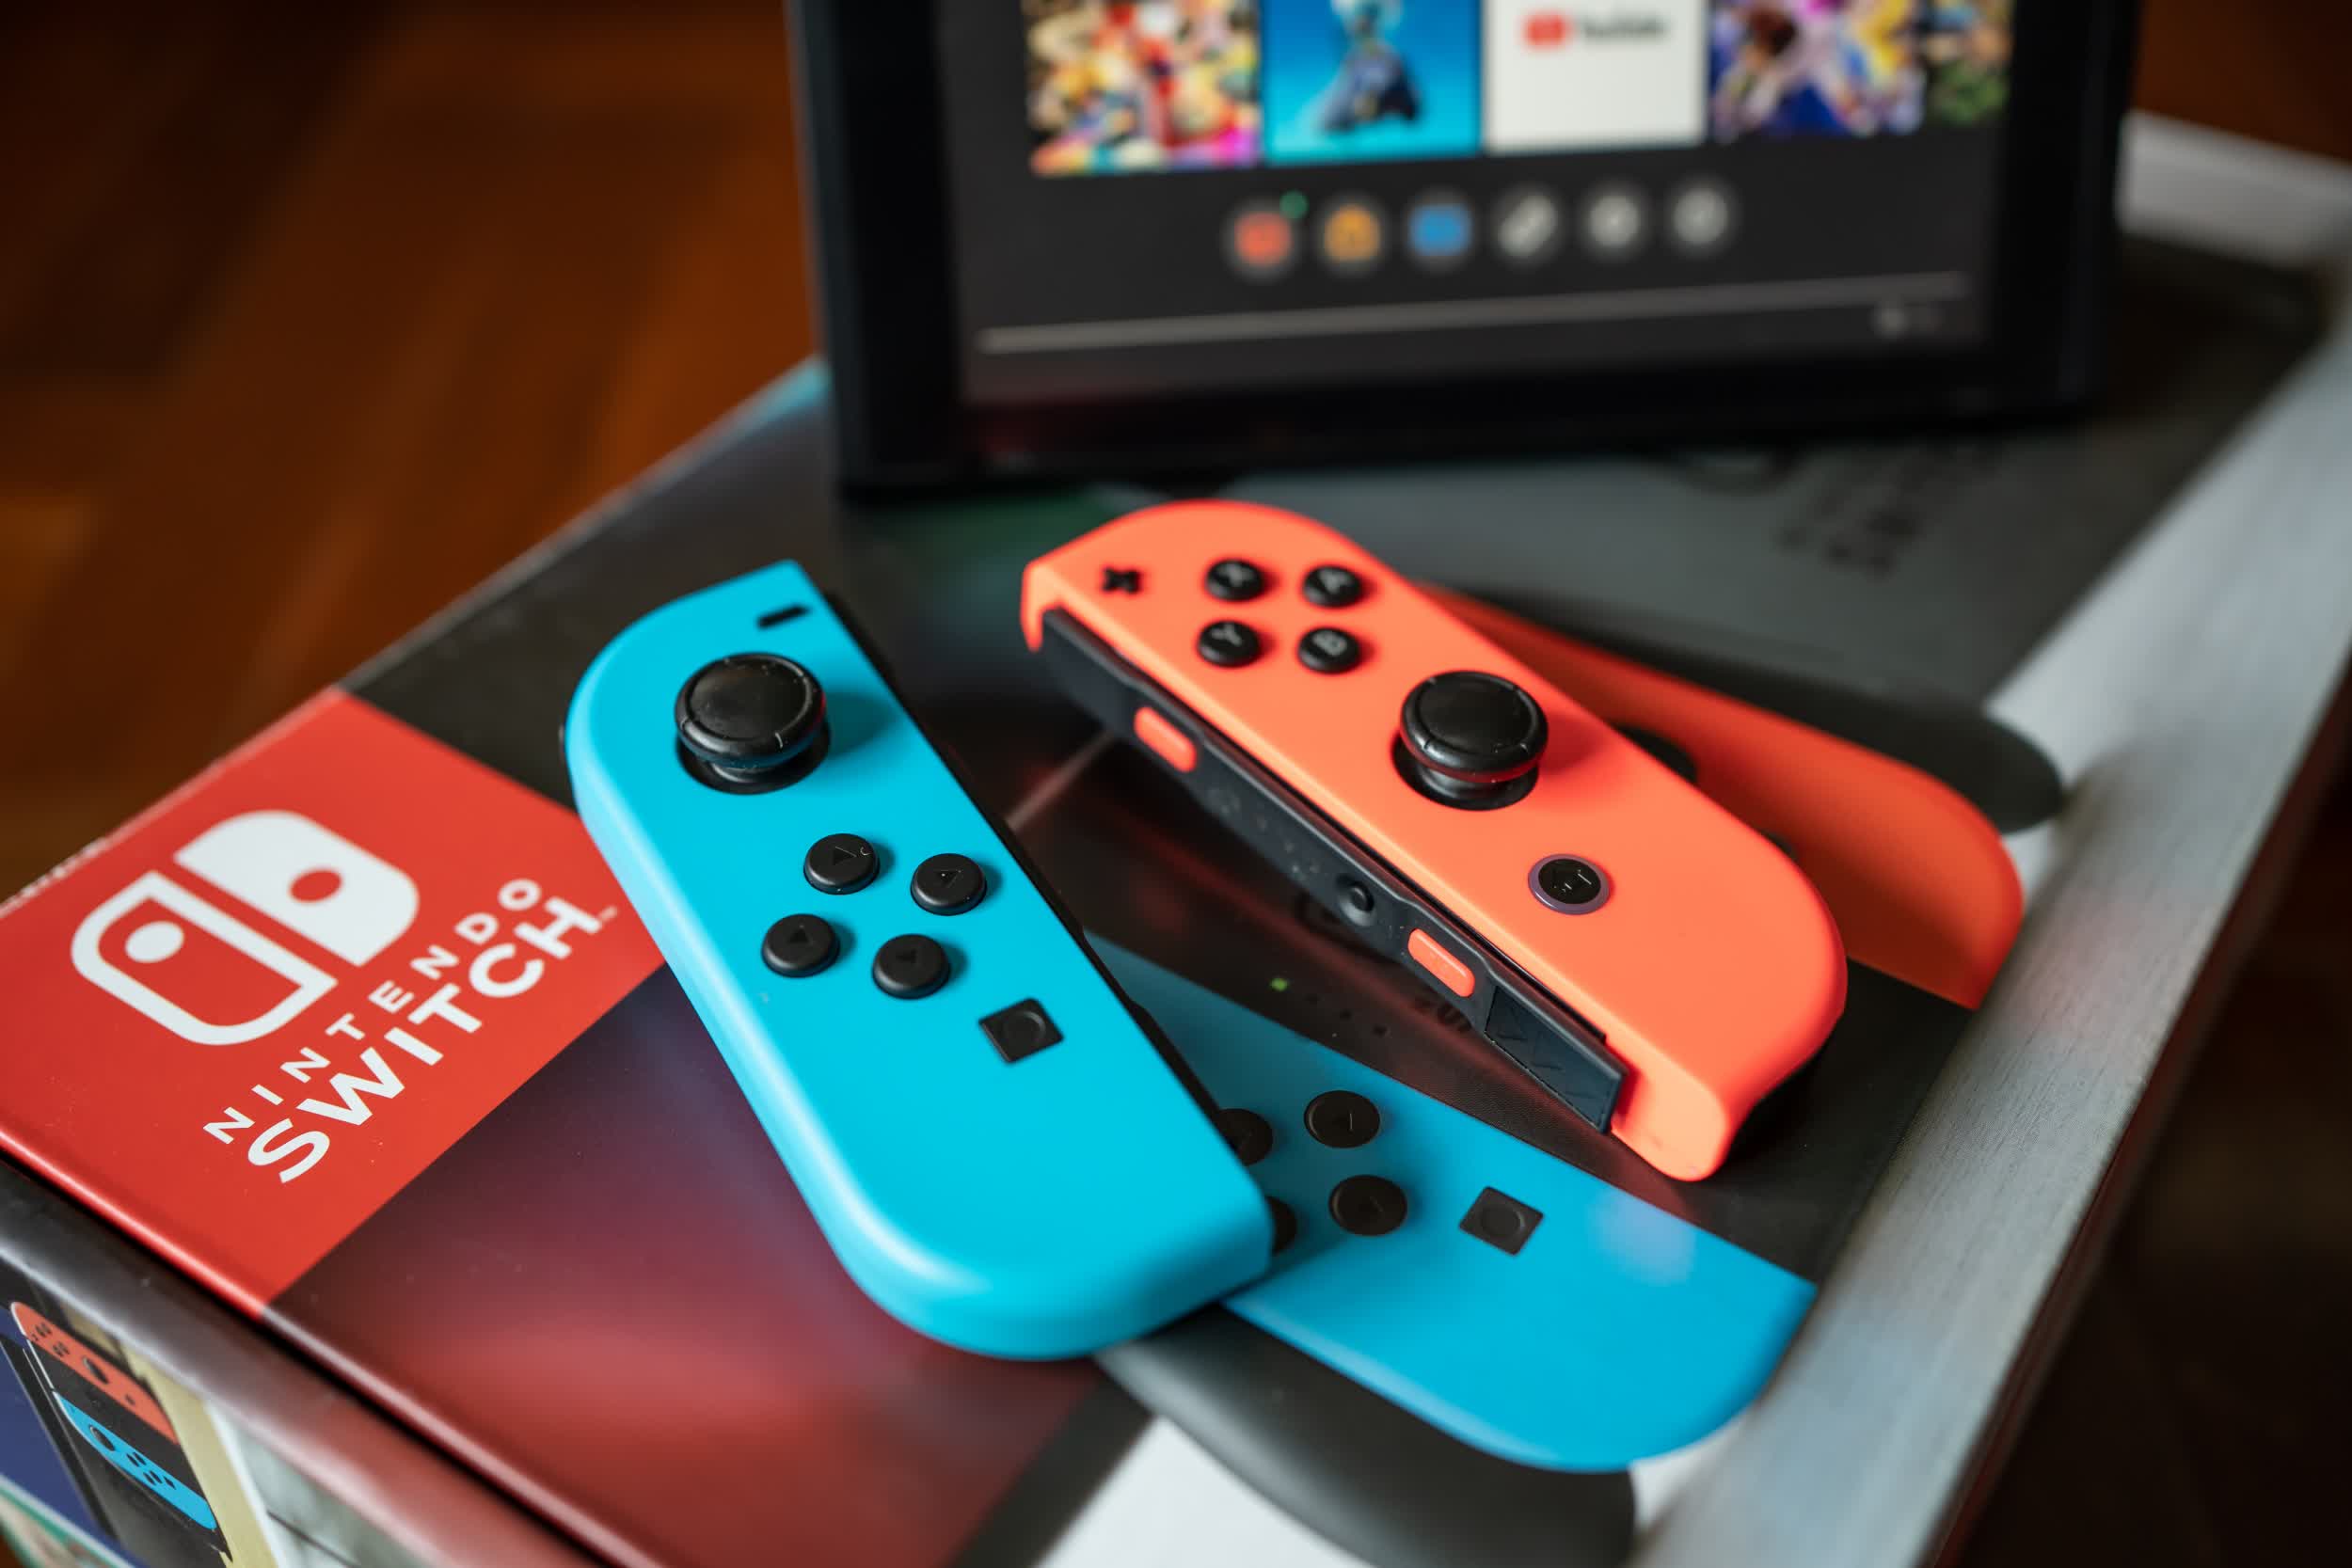 Upcoming Nintendo Switch will reportedly feature Nvidia DLSS, OLED screen, $399 price tag